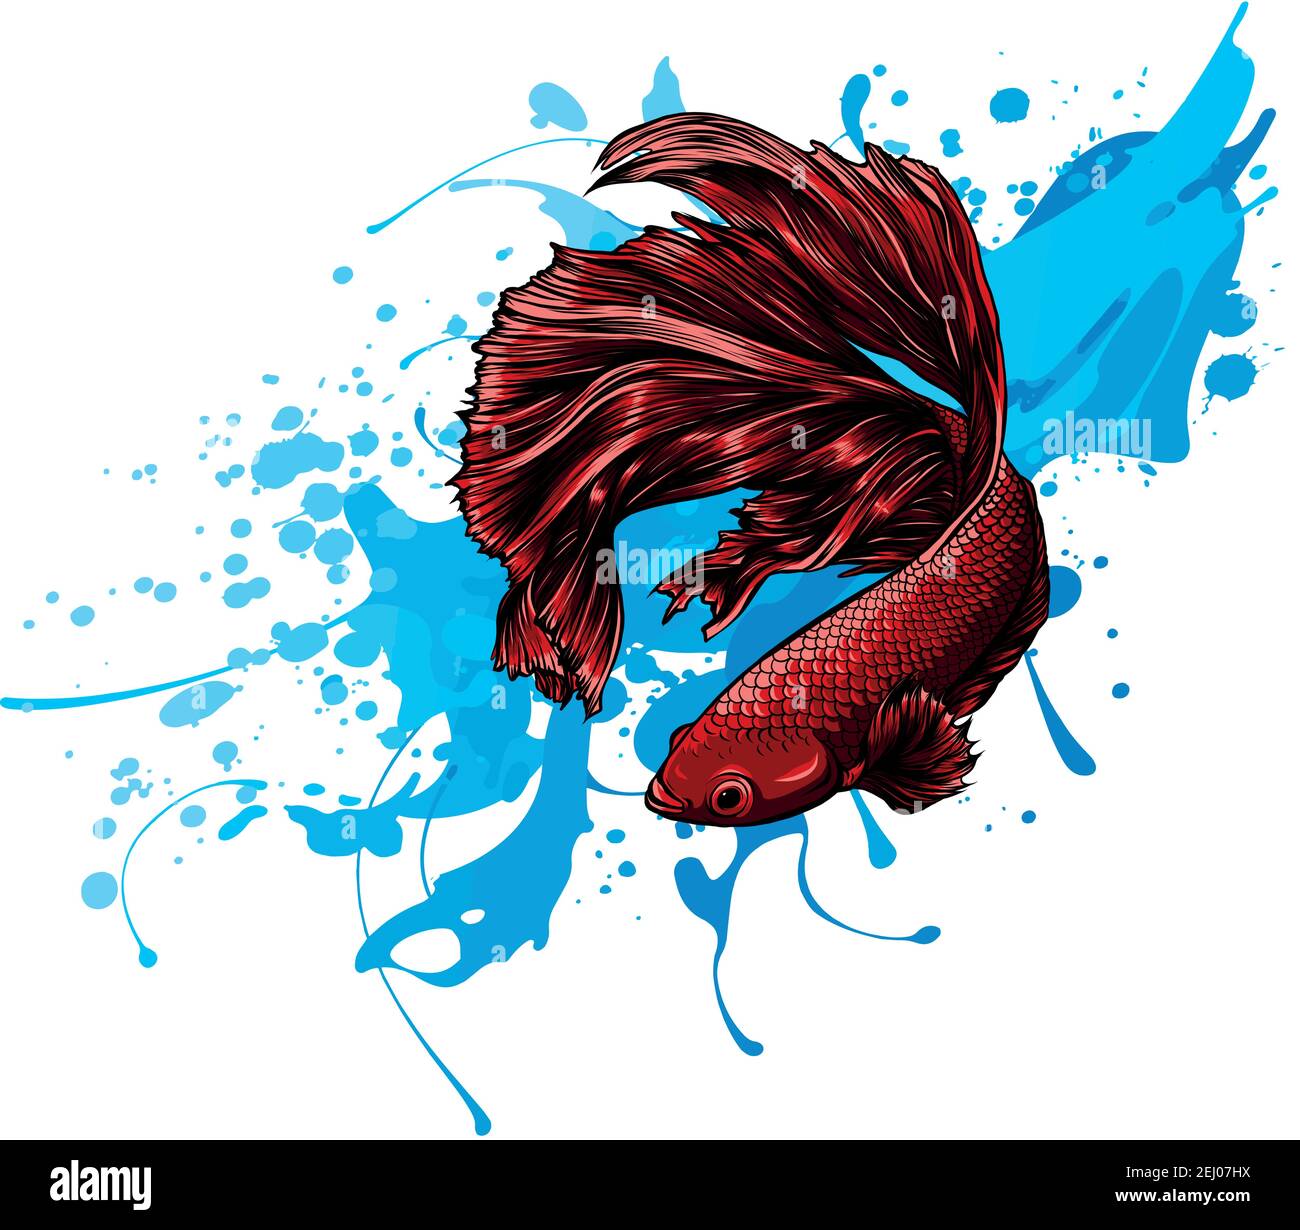 Colorful Betta Fish with water splash Vector Illustration. Stock Vector